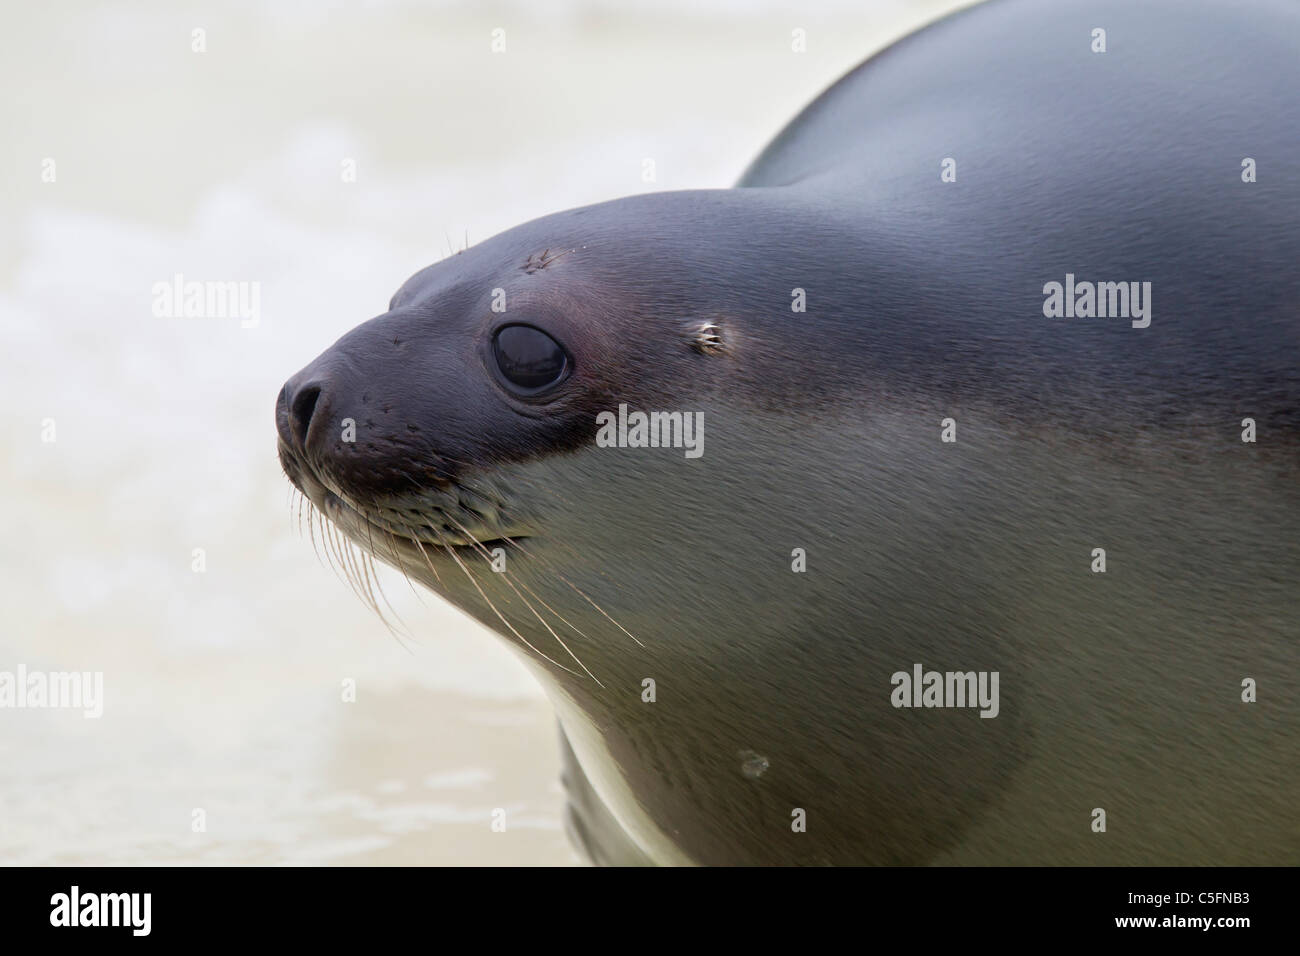 Hooded seal (Cystophora cristata), young female close-up, Germany Stock Photo